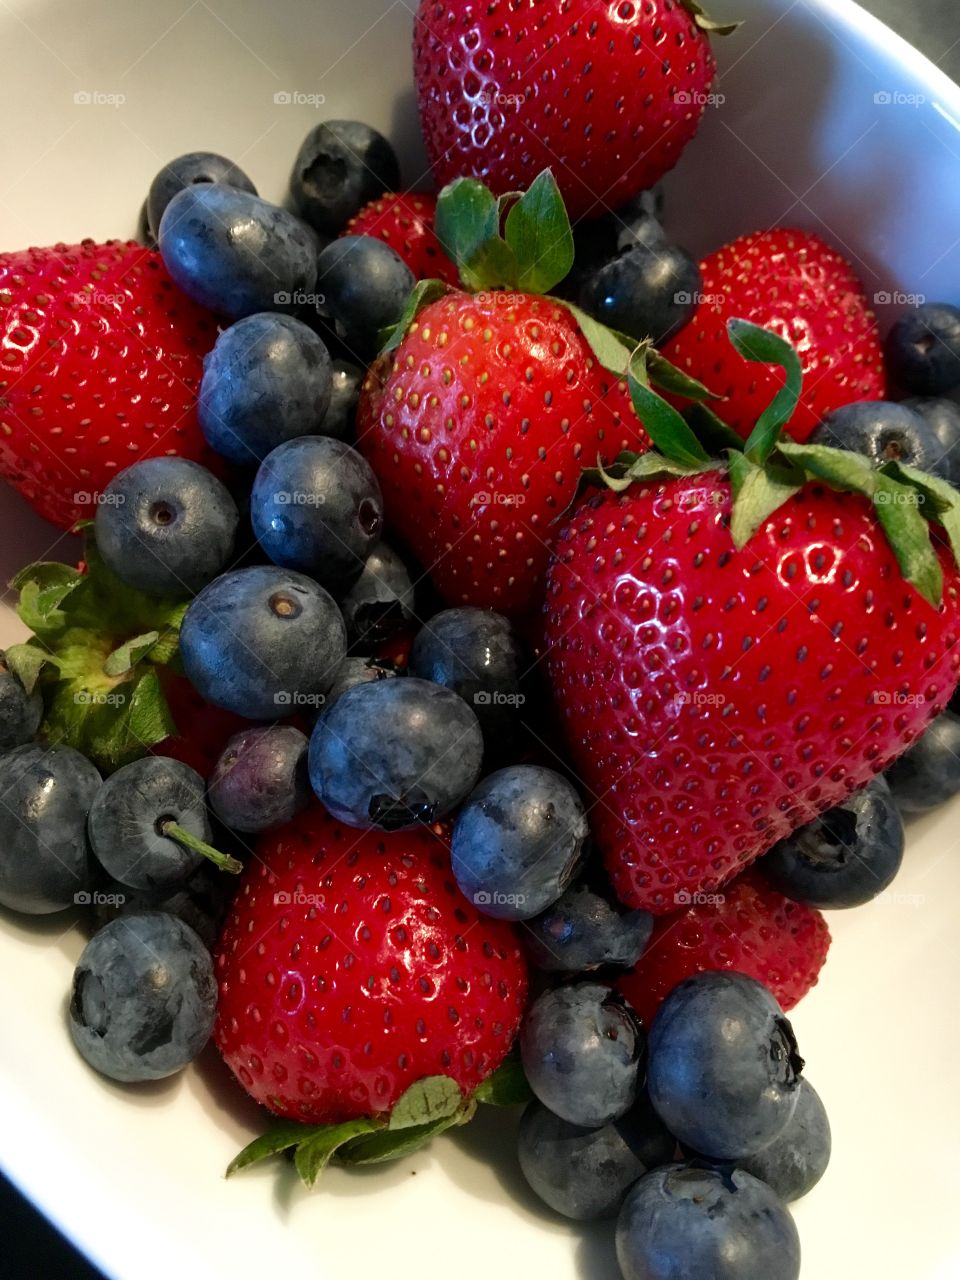 Strawberries and Blueberries 